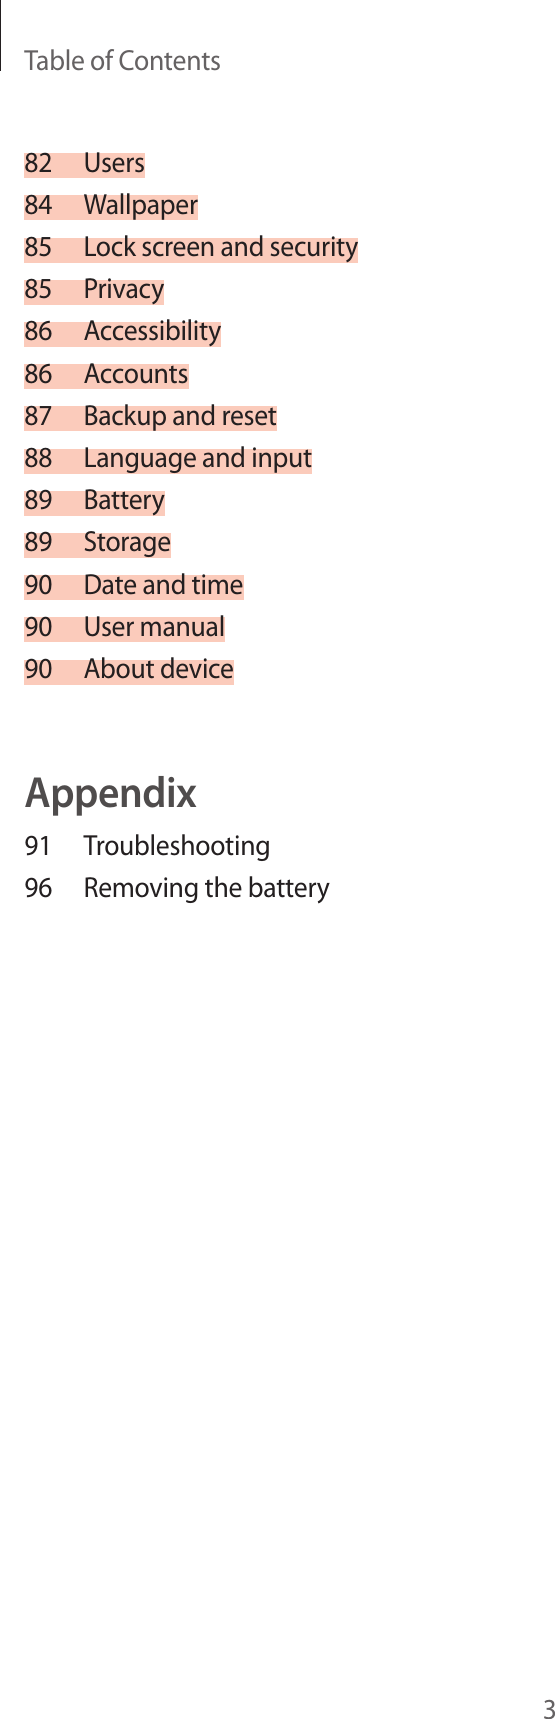 Table of Contents382 Users84 Wallpaper85  Lock screen and security85 Privacy86 Accessibility86 Accounts87  Backup and reset88  Language and input89 Battery89 Storage90  Date and time90  User manual90  About deviceAppendix91 Troubleshooting96  Removing the battery